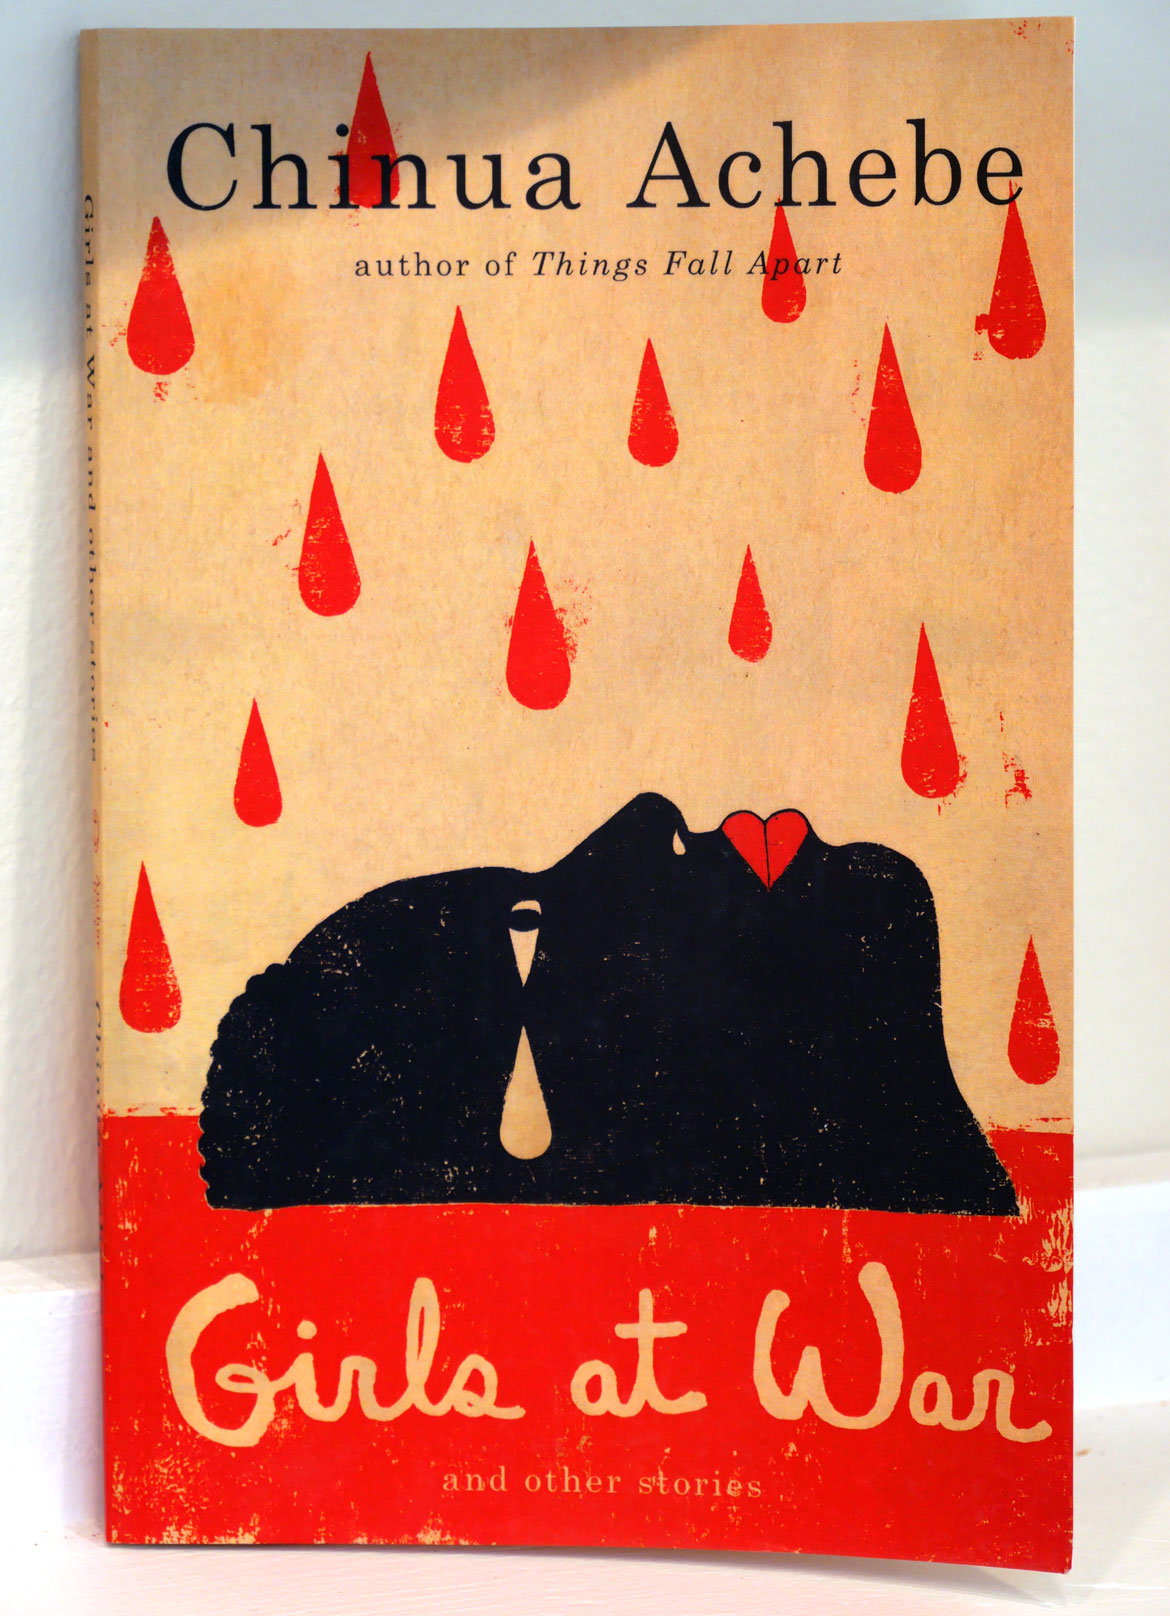 Edel Rodriguez's cover illustration for Chinua Achebe's book "Girls at War."